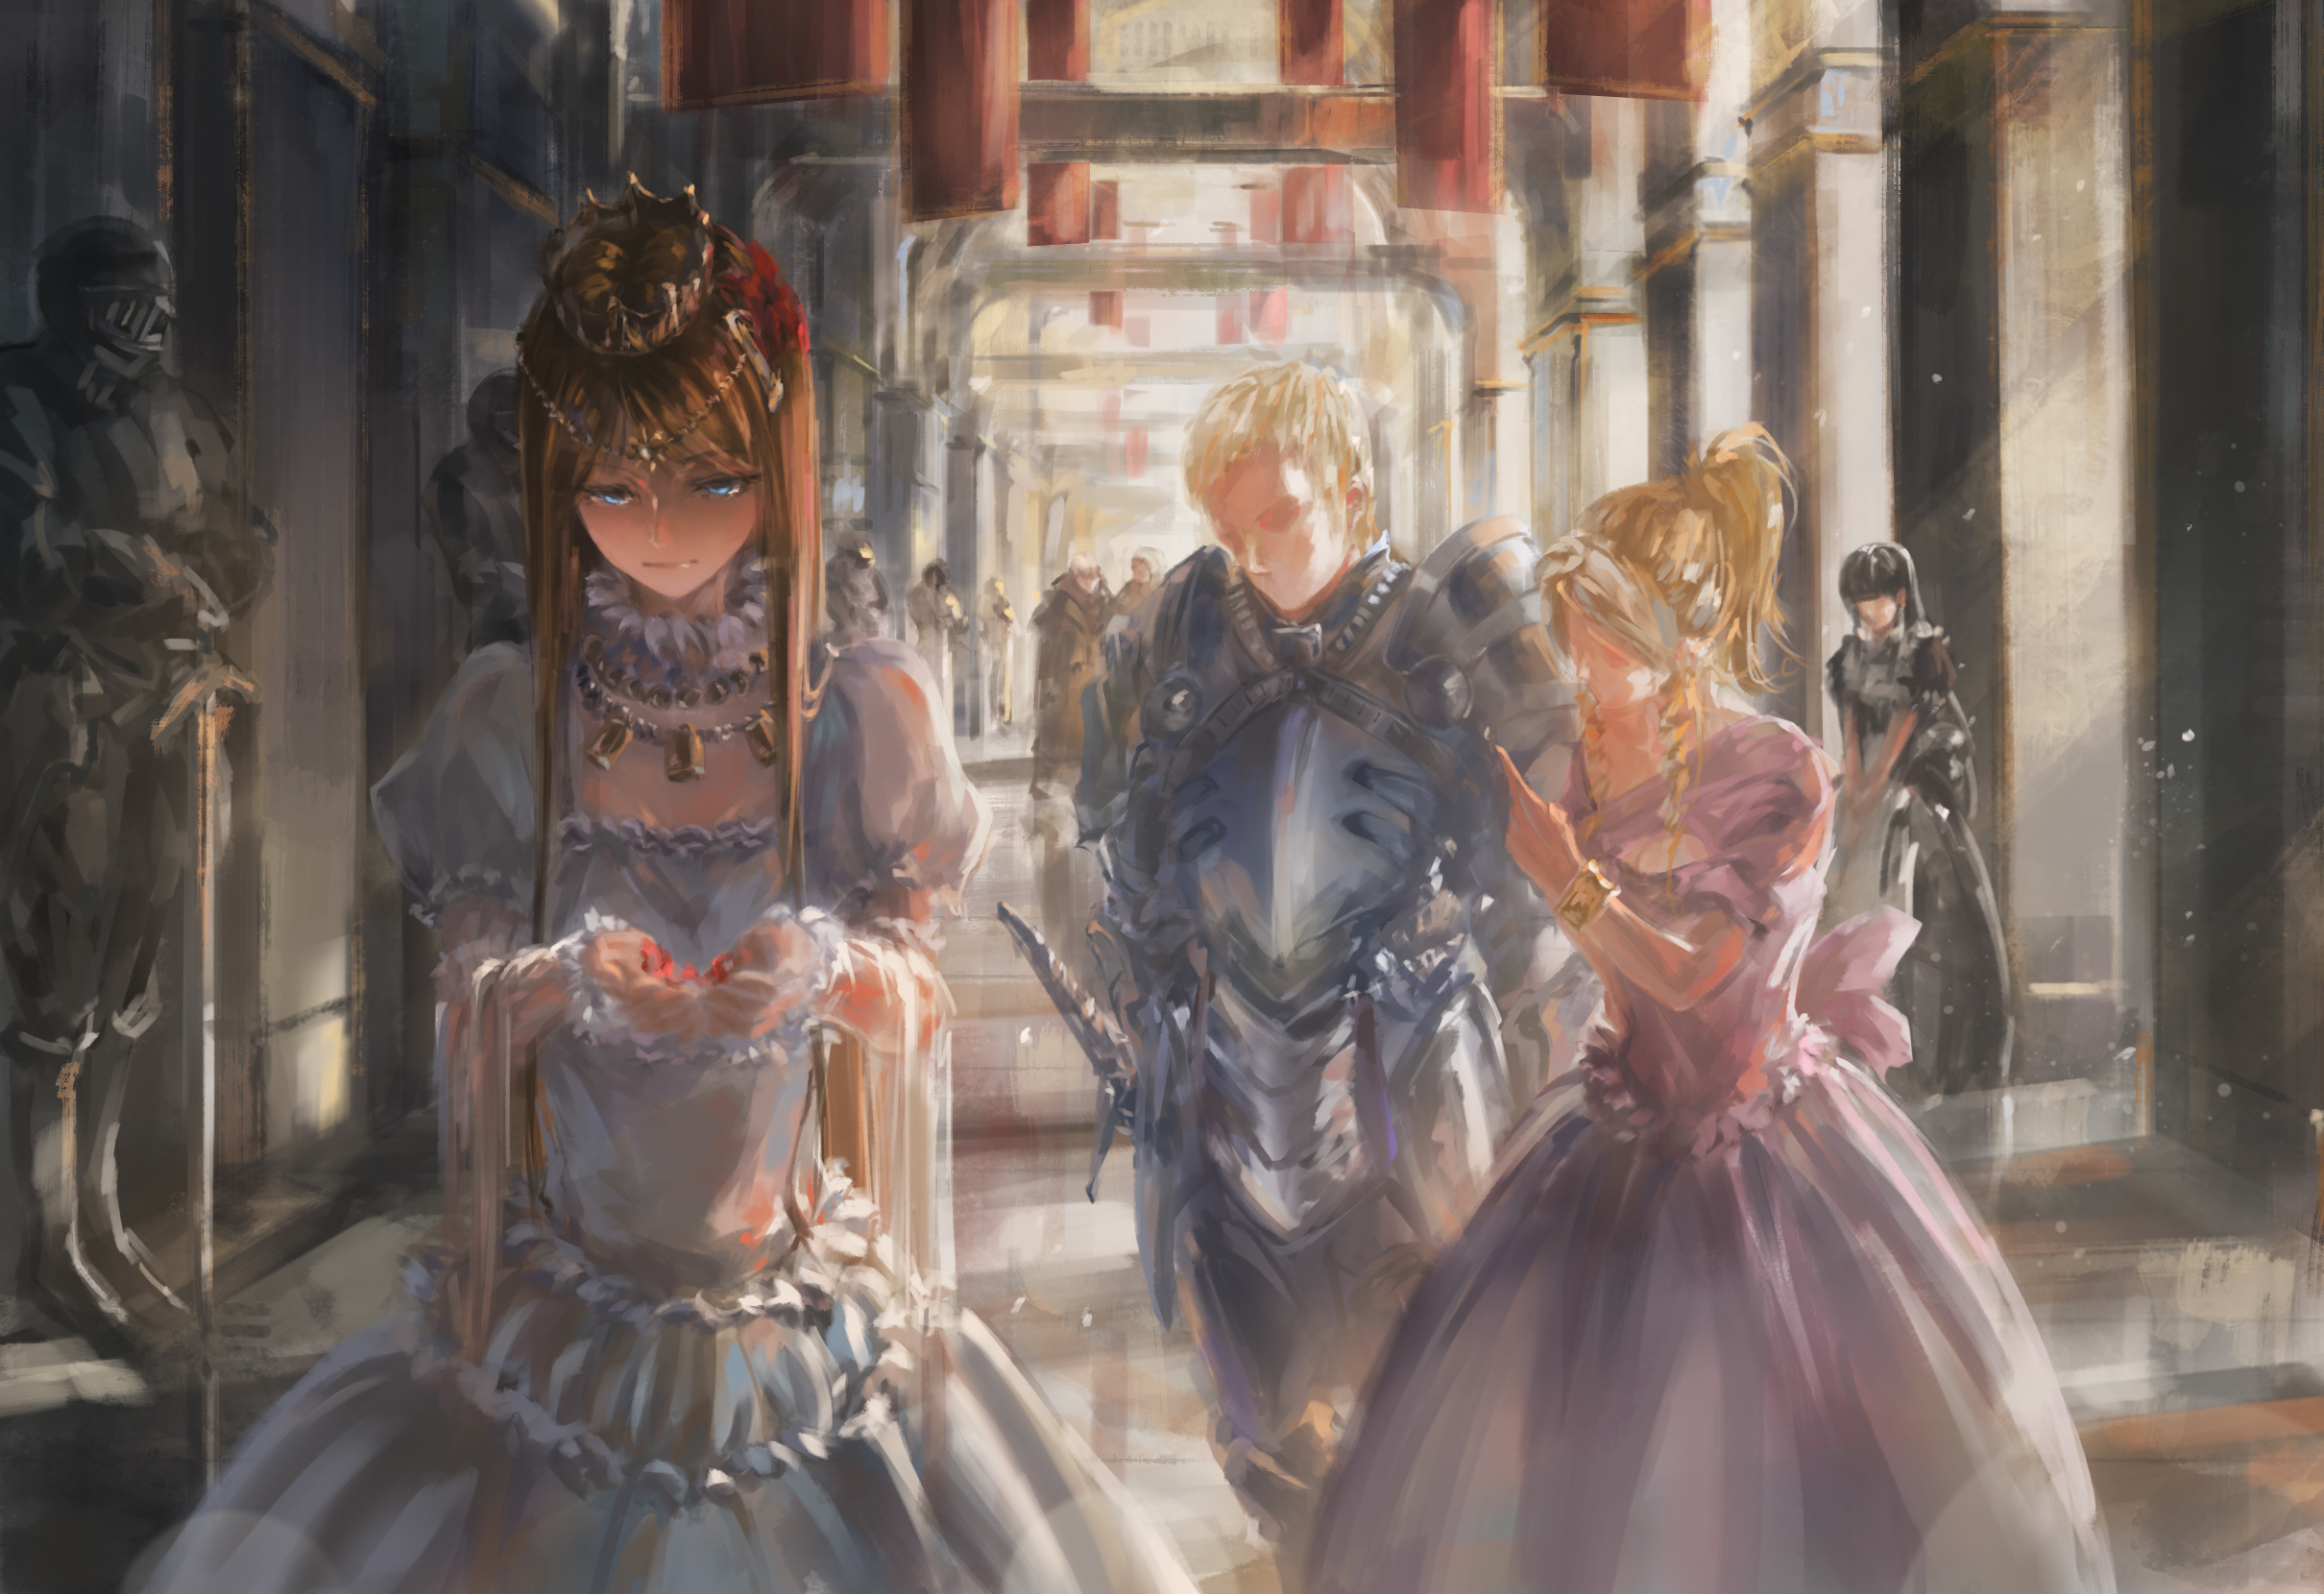 Anime 2420x1660 Overlord (anime) palace fantasy armor maid pink dress white dress princess crown small boobs cleavage blue eyes jewelry red petals ponytail long hair short hair curvy hair in face bangs Renner Theiere Chardelon Ryle Vaiself castle fan art 2D anime Song Ren knight anime girls anime boys blonde brunette